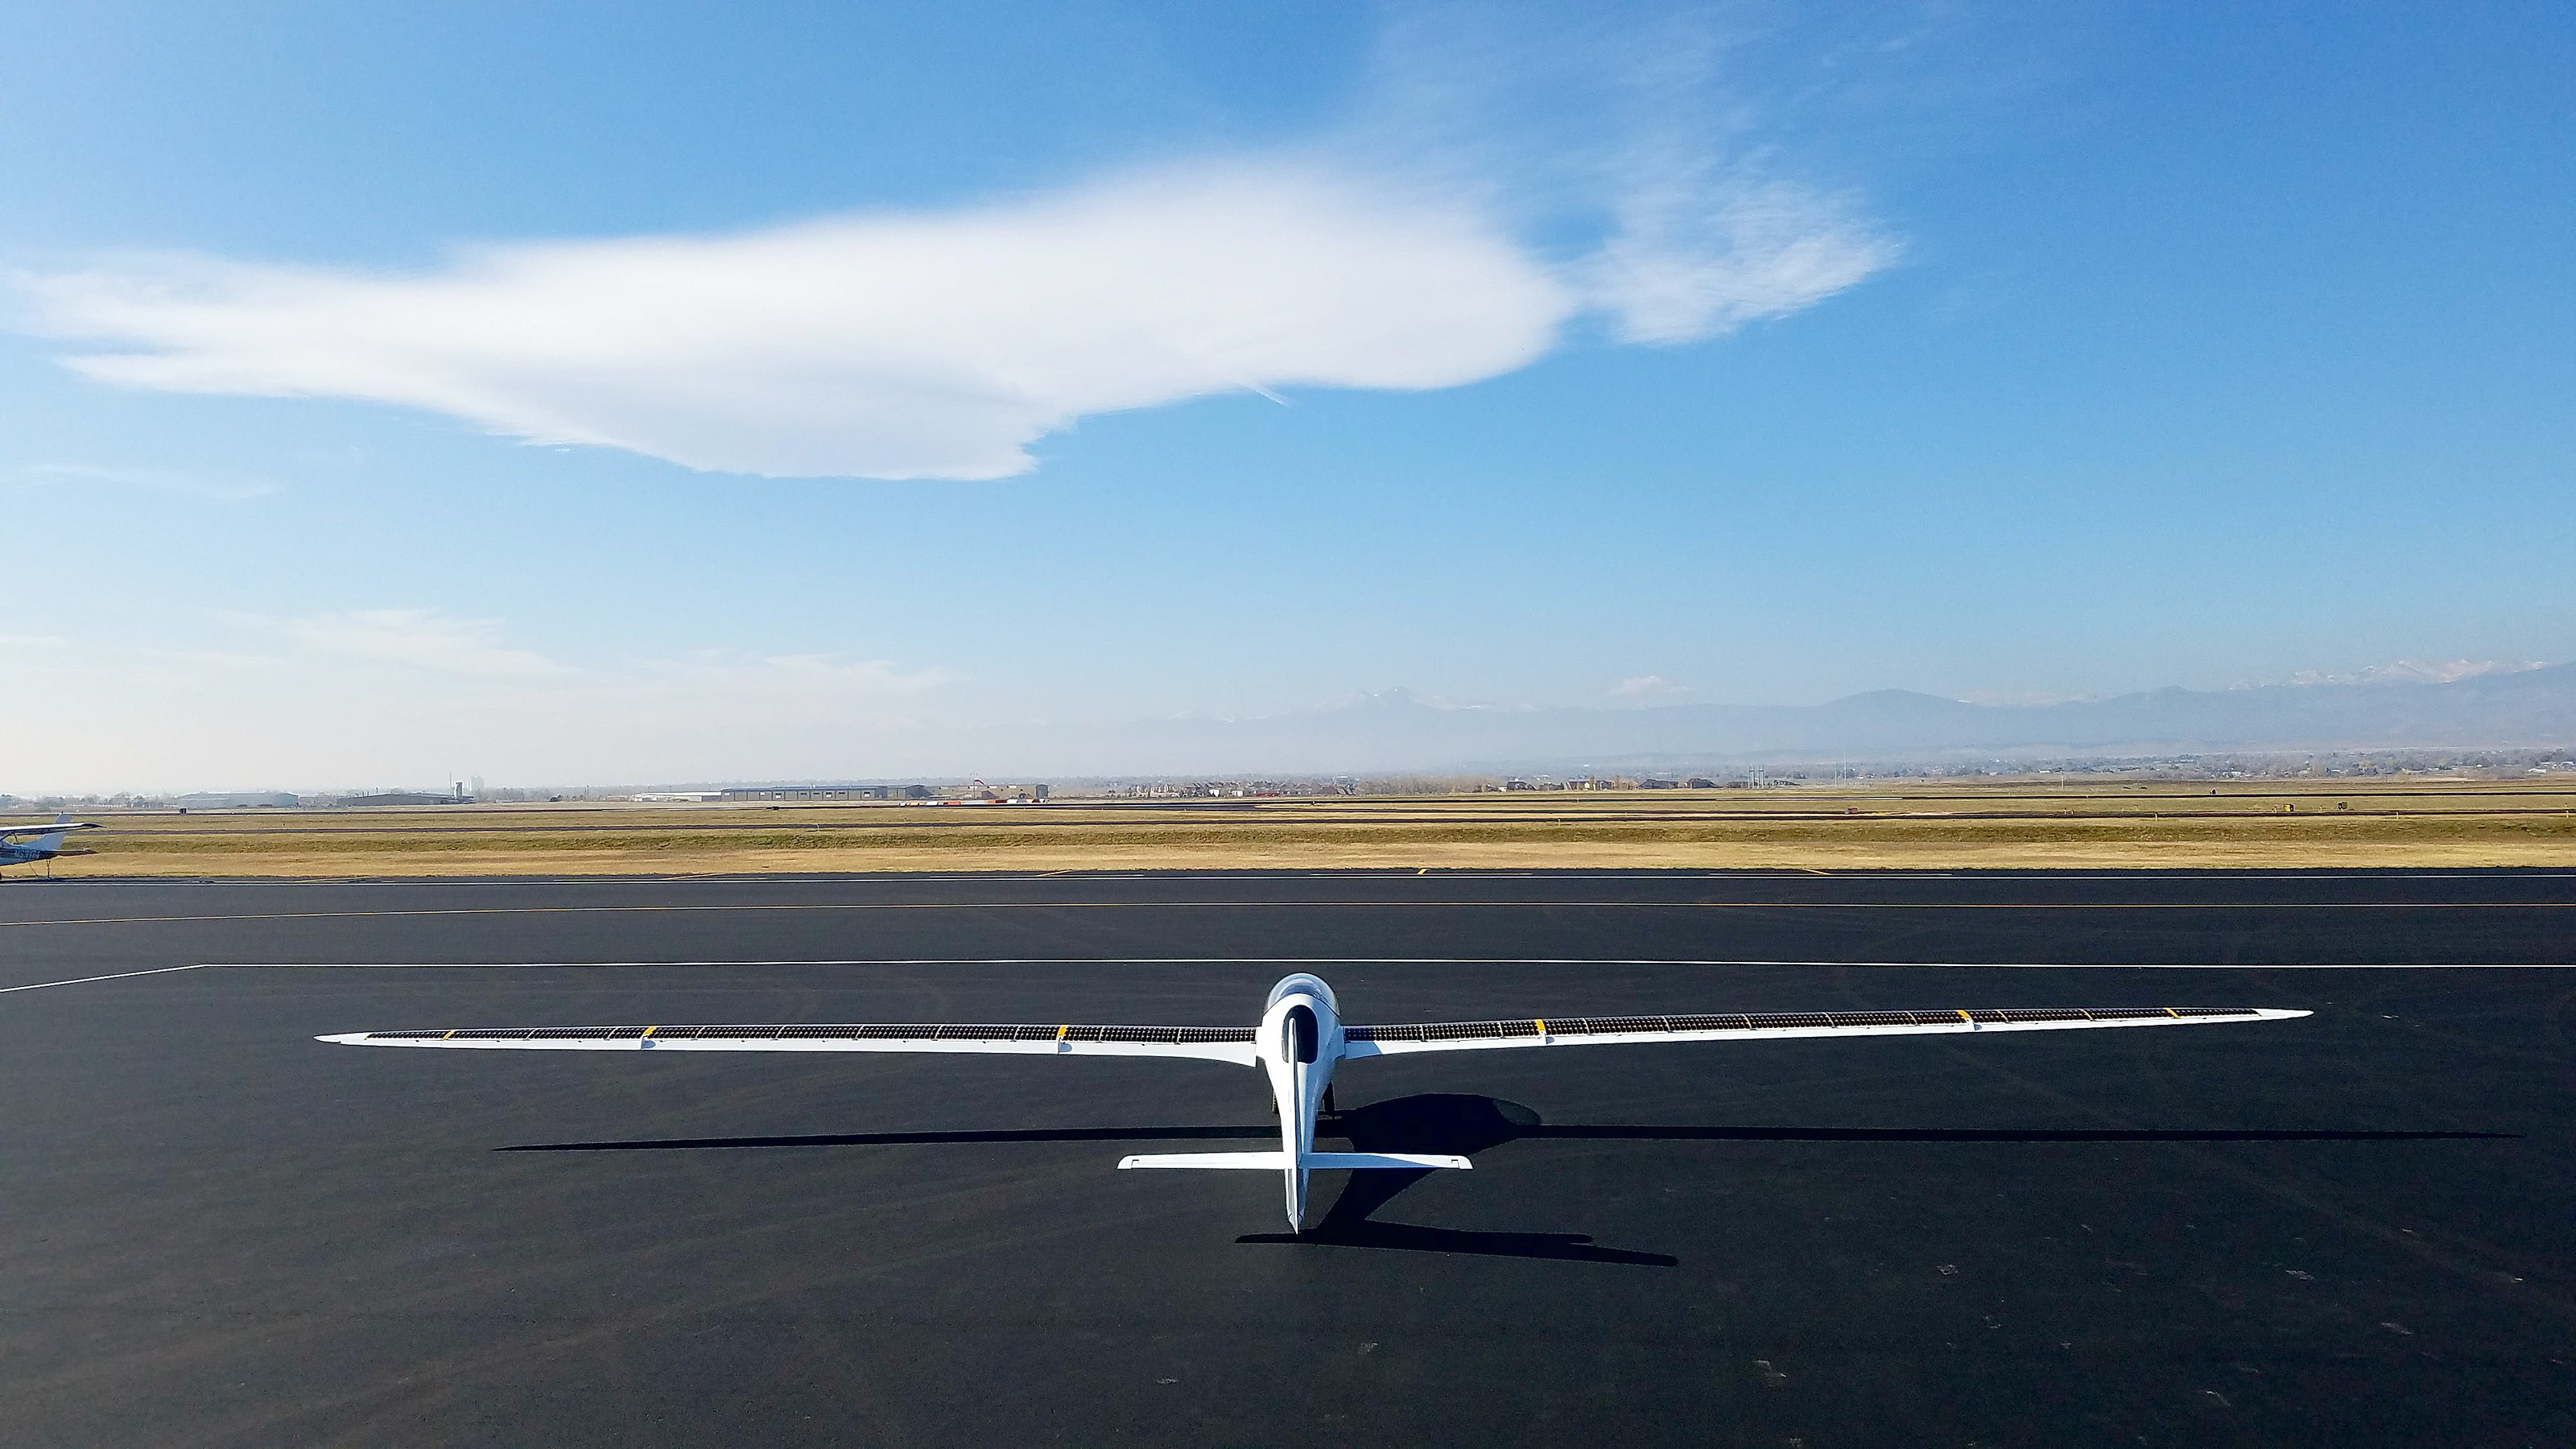 Bye Aerospace is developing what it calls the StratoAirNet 'advanced, high-altitude, long-endurance solar-electric unmanned aerial vehicle.' Photo courtesy of Bye Aerospace.